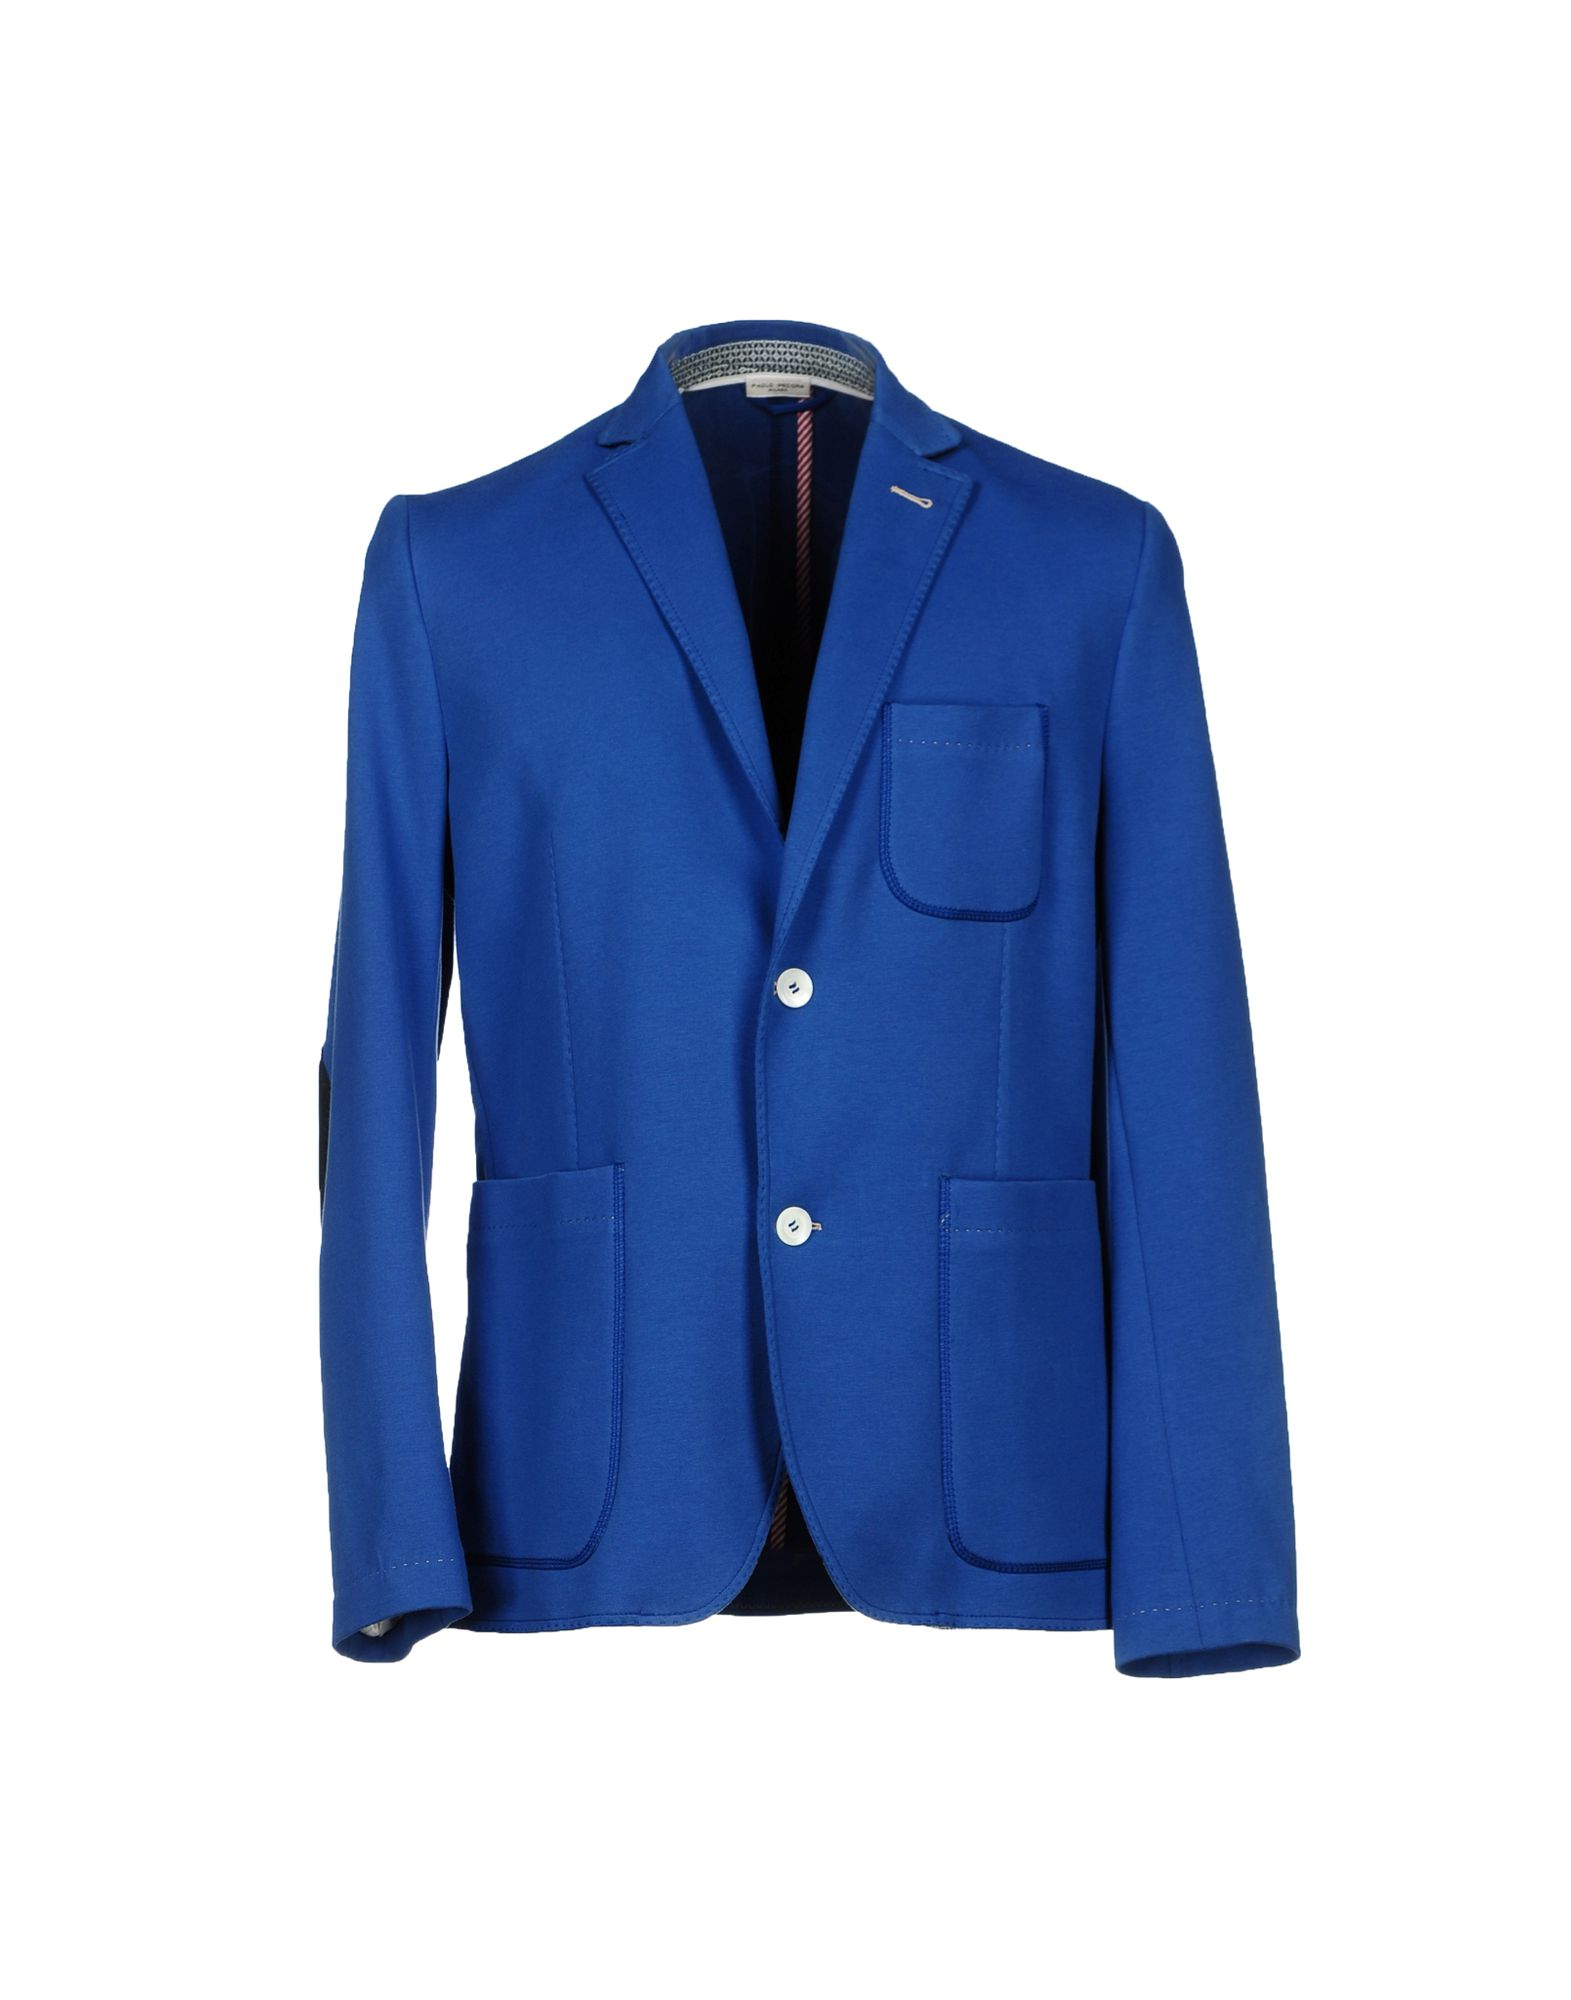 Paolo pecora Blazer in Blue for Men (Azure) - Save 71% | Lyst